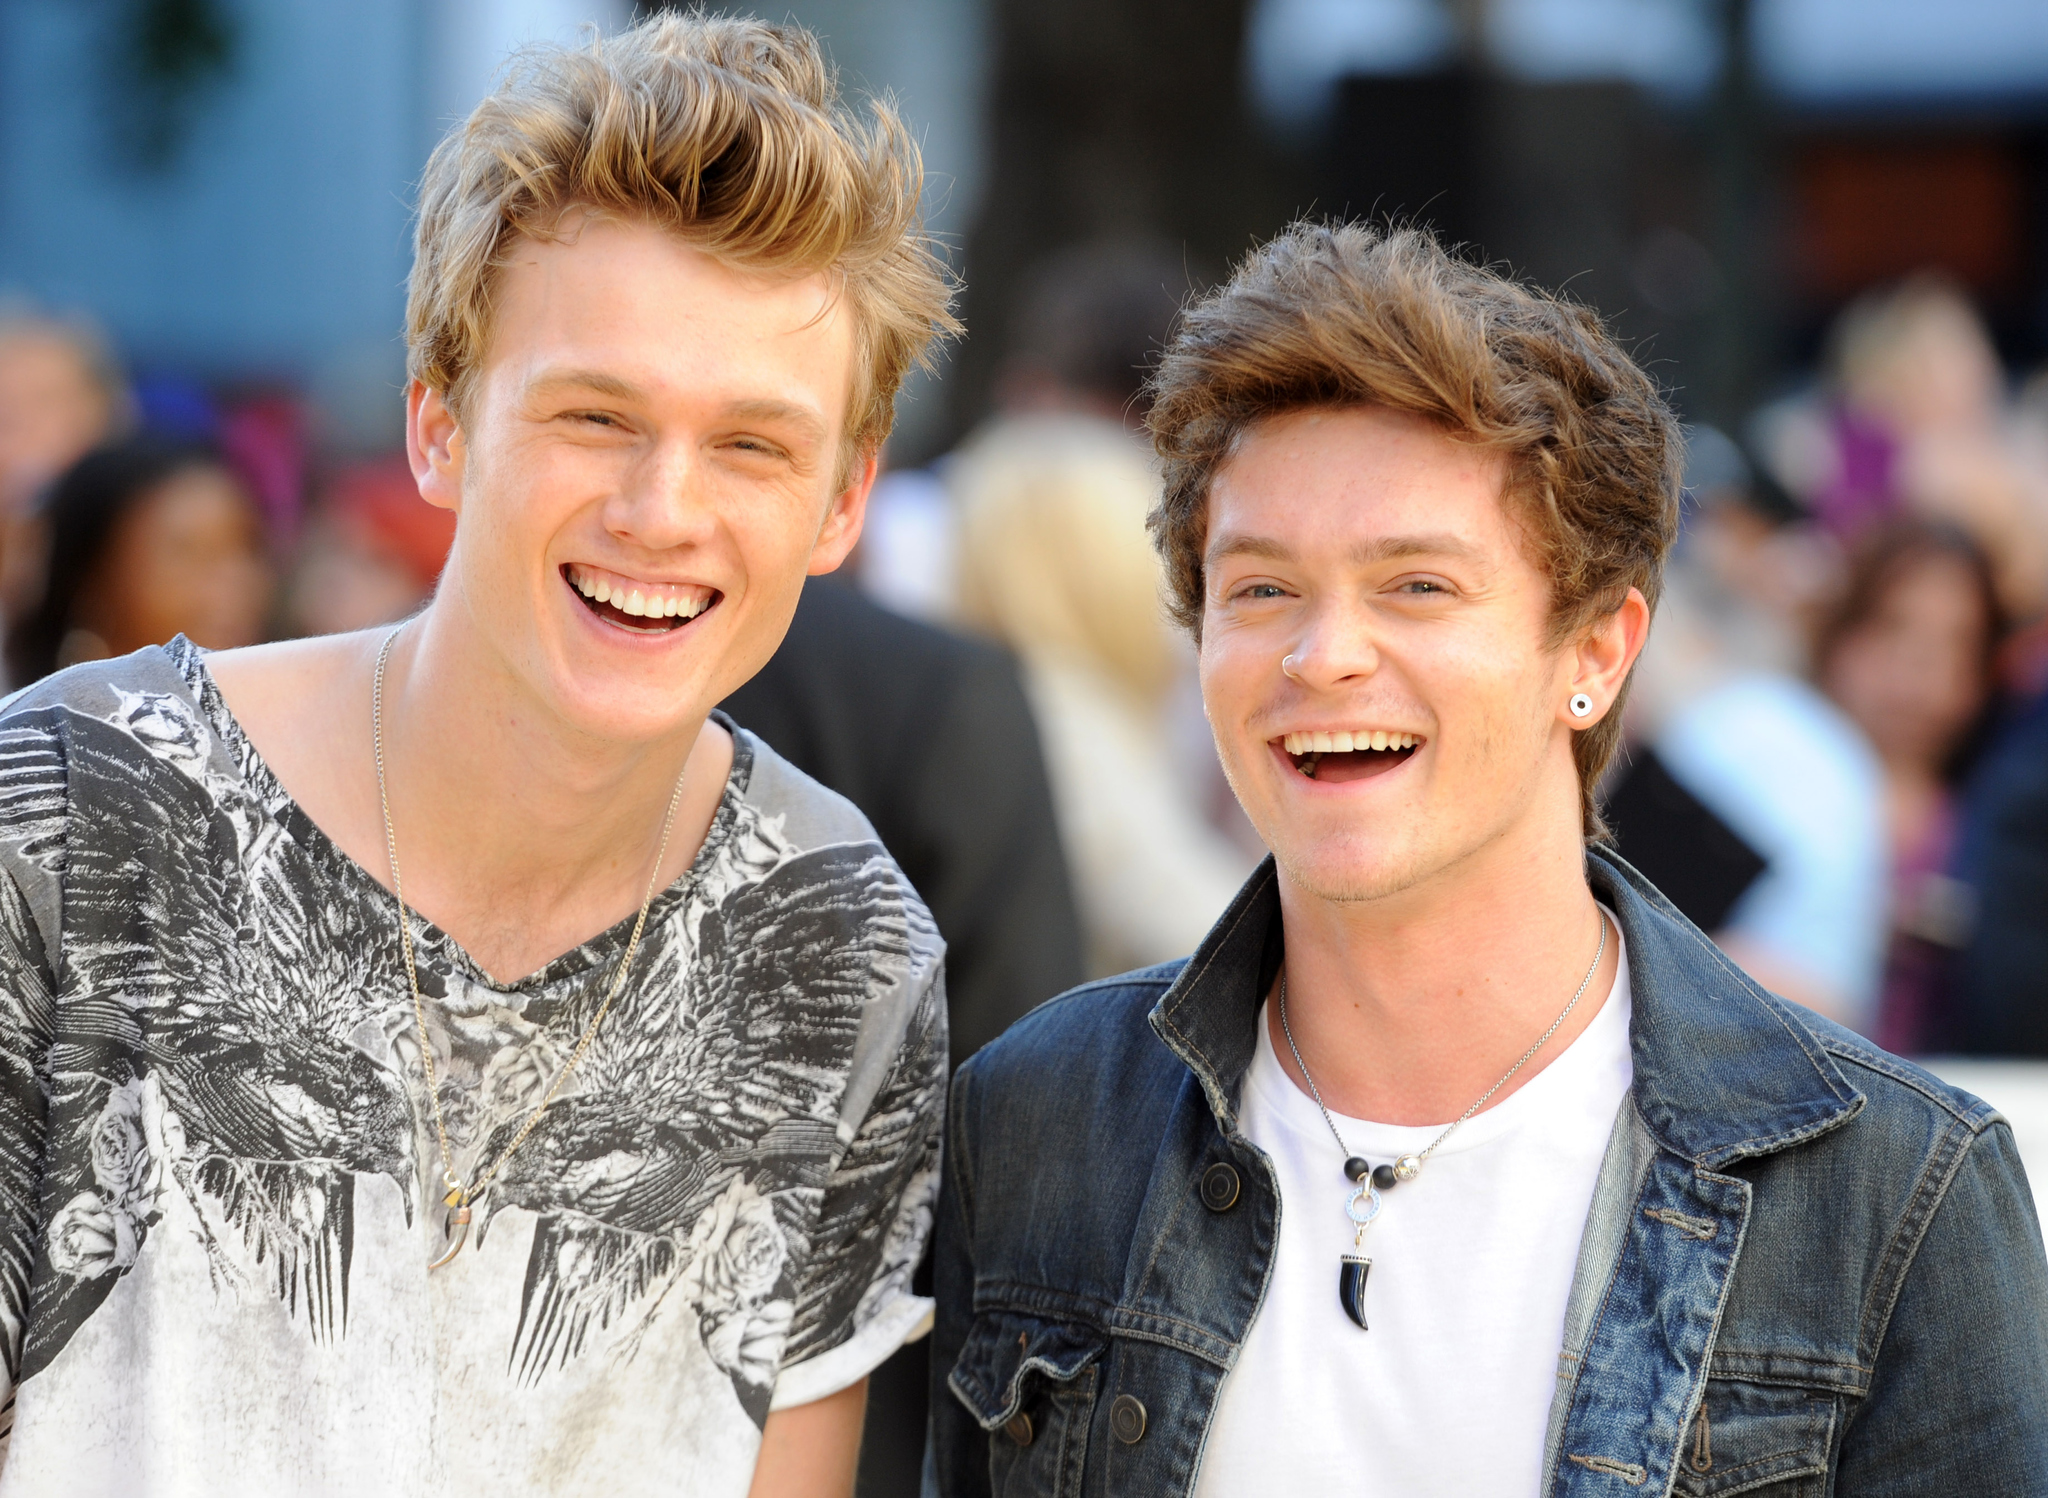 Connor Ball and Tristan Evans at event of Pakalikai (2015)